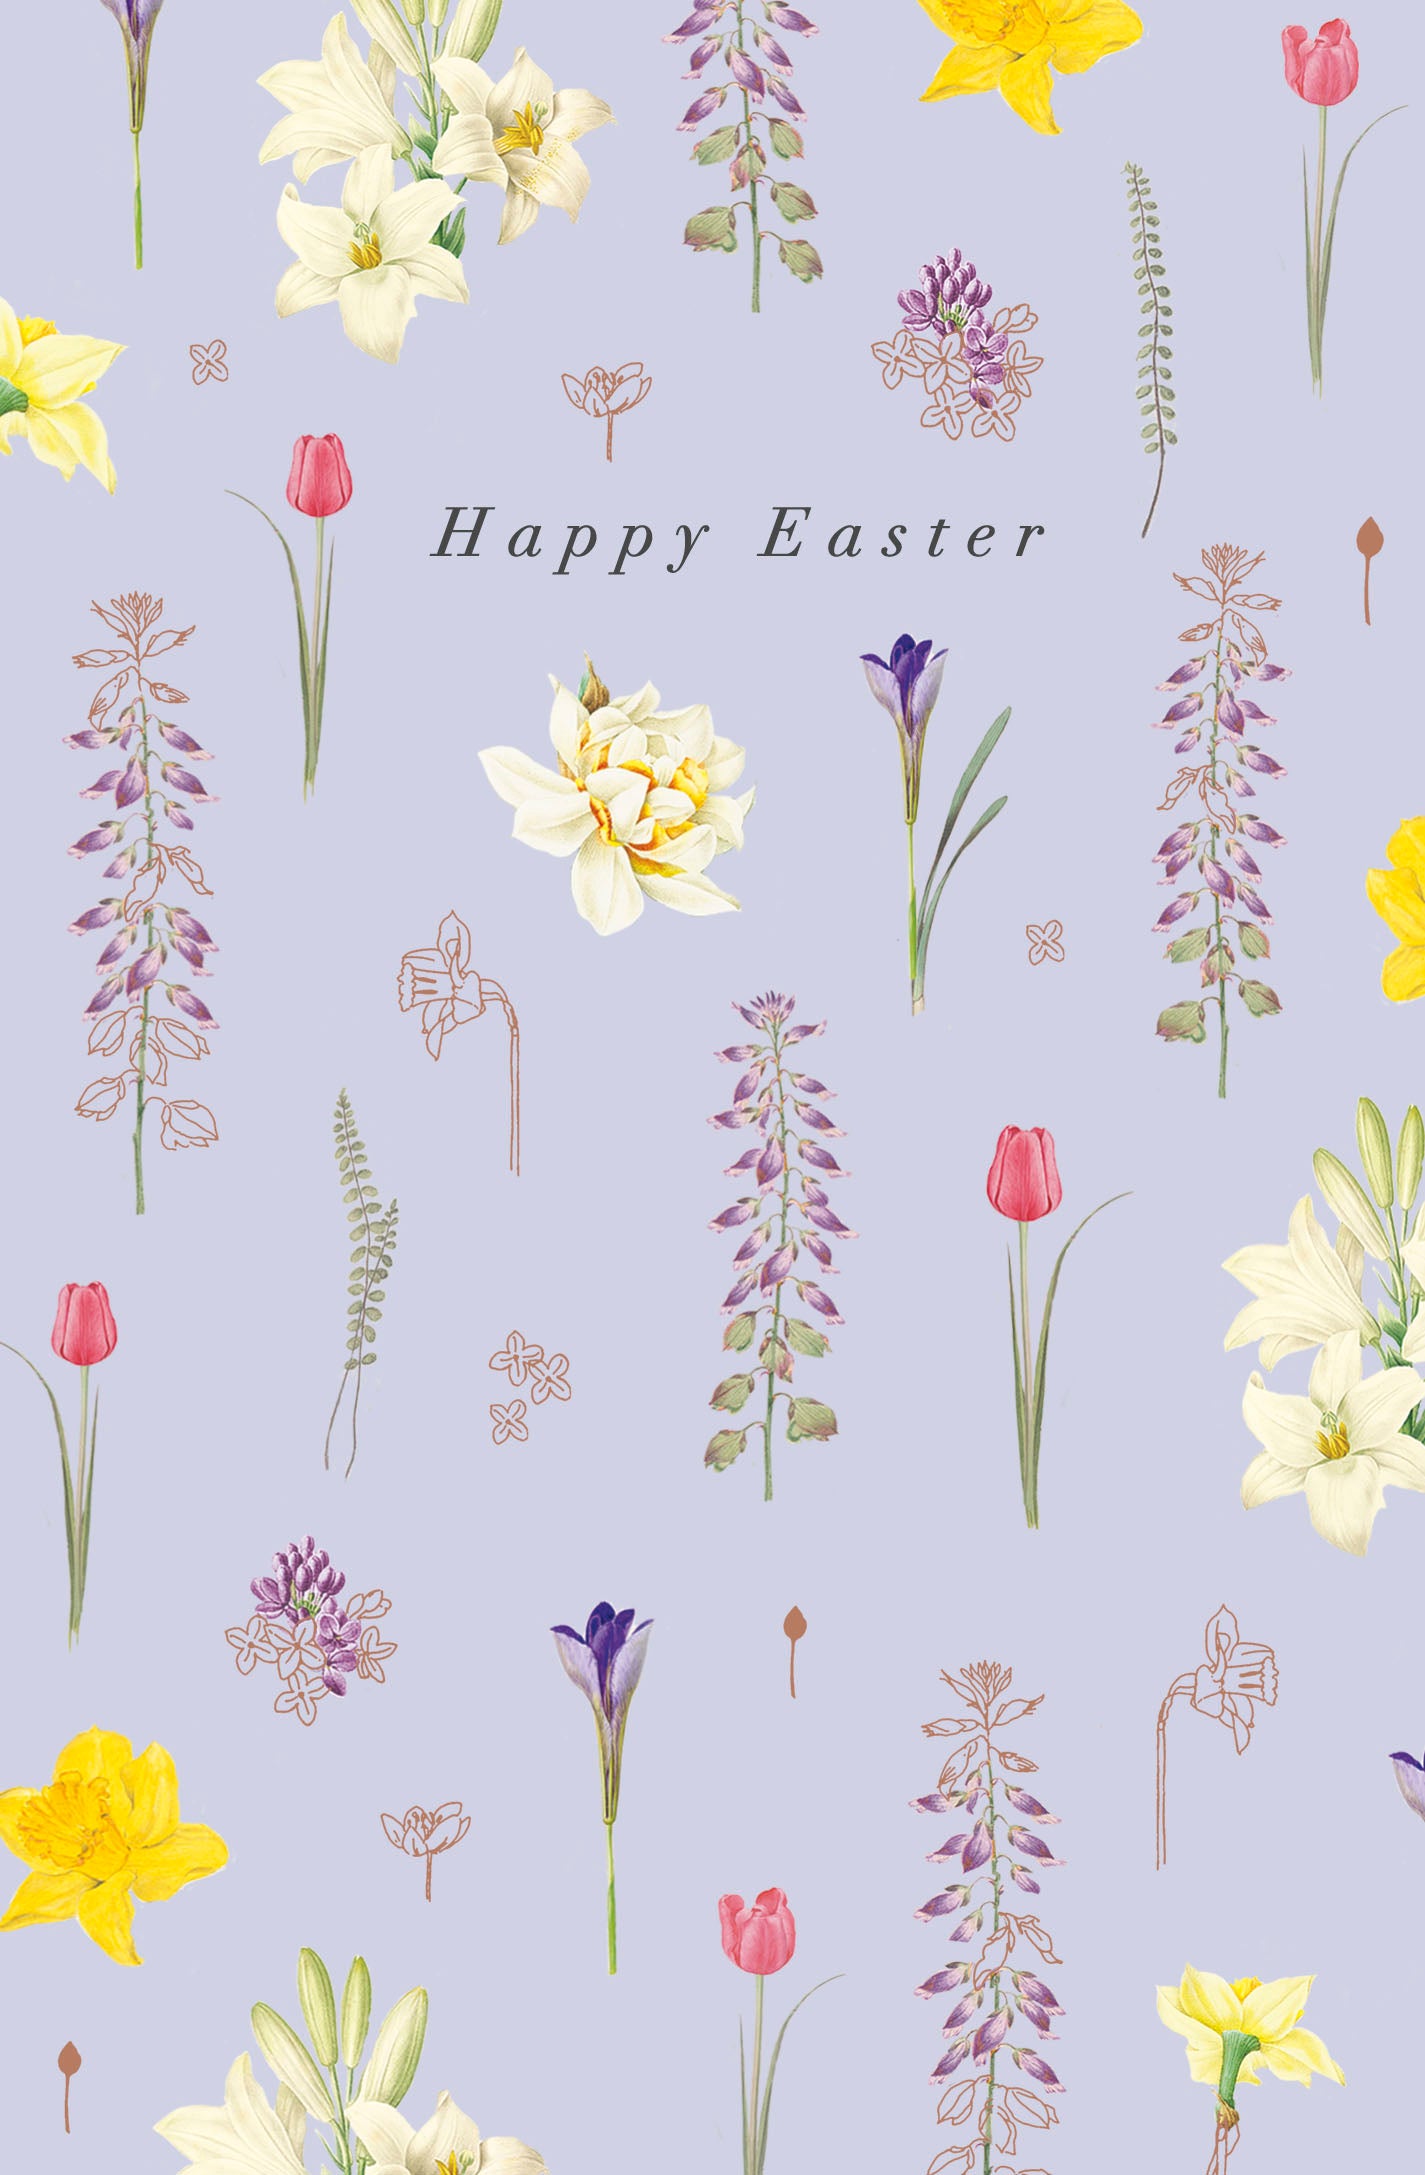 RHS Happy Easter Egg-citing Blossoms Easter Card Artistic Greeting Card